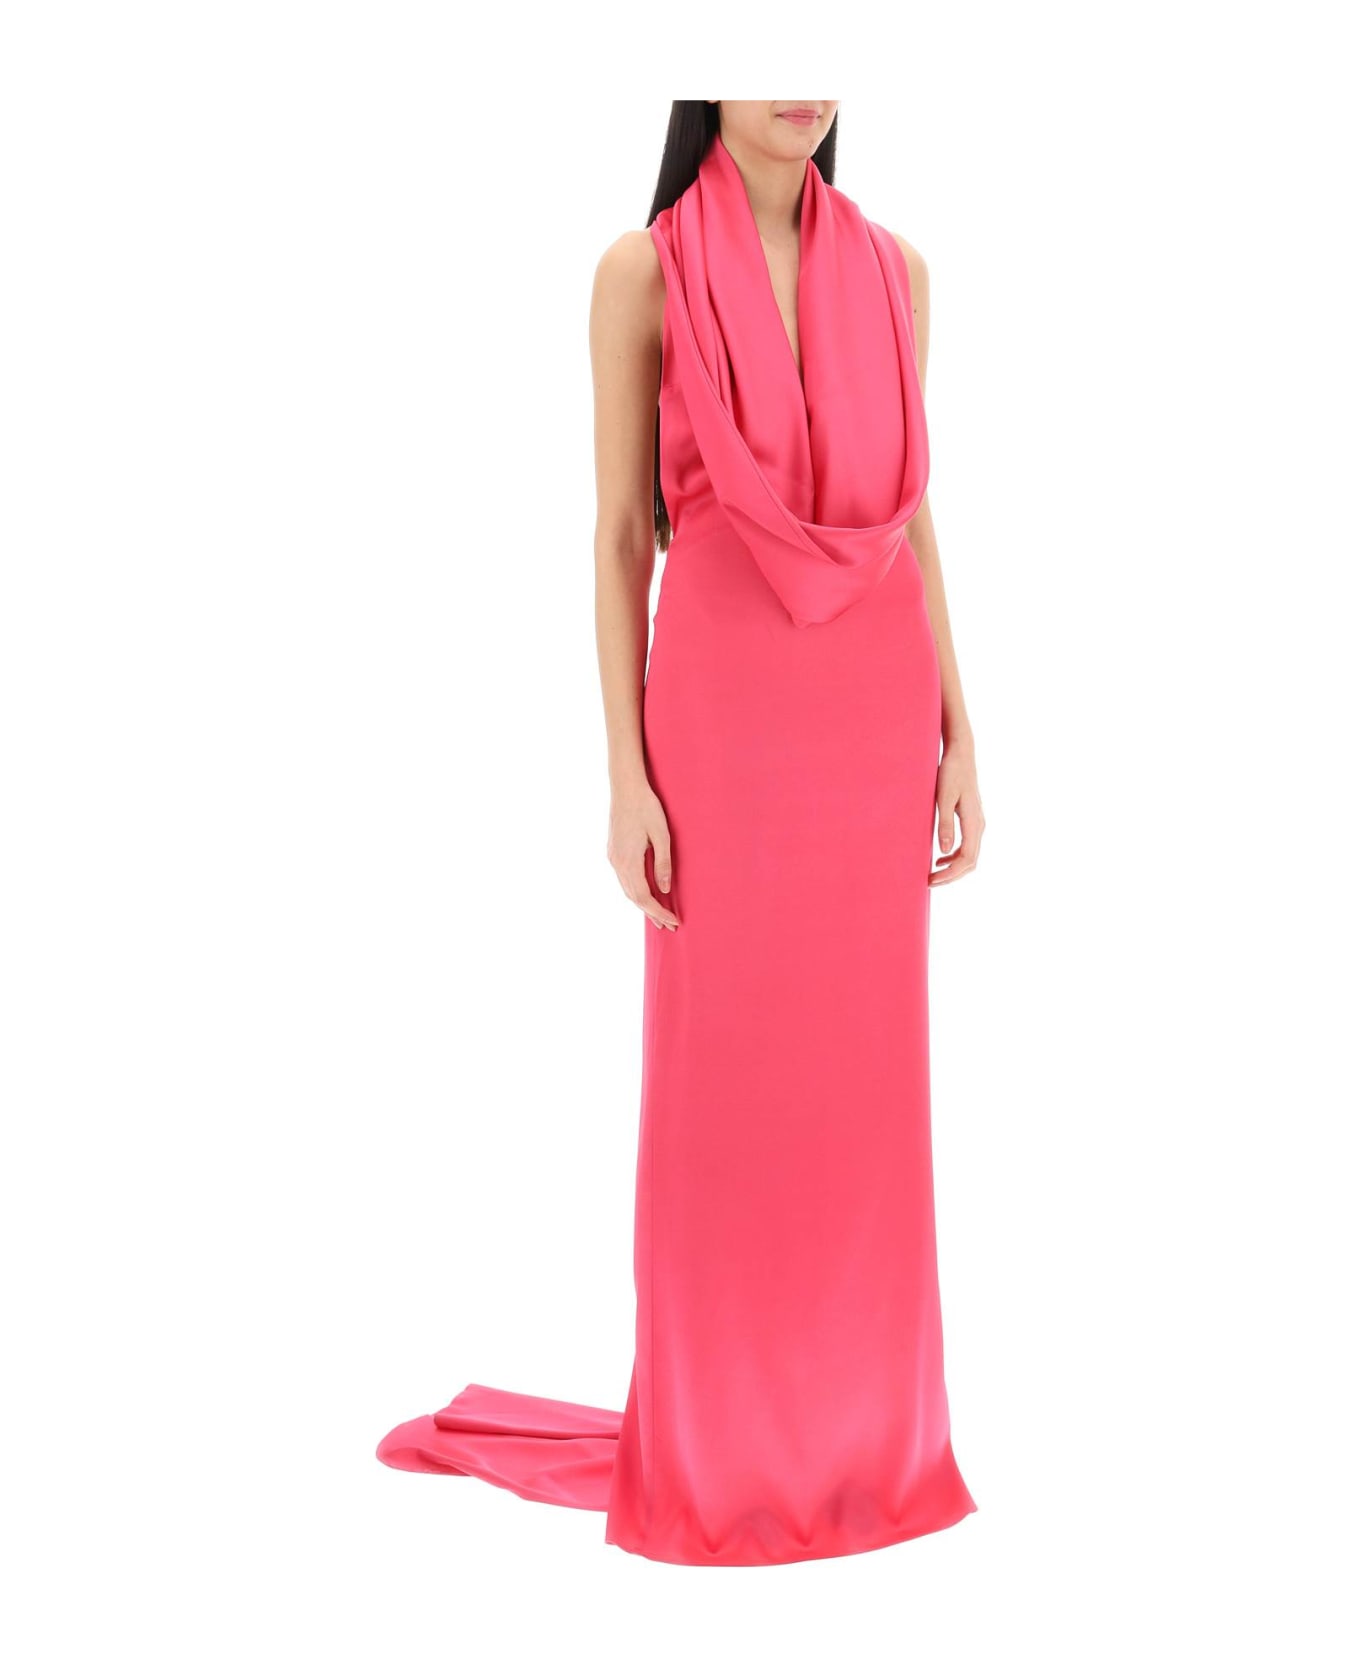 Giuseppe di Morabito Maxi Gown With Built-in Hood - PINK (Fuchsia)